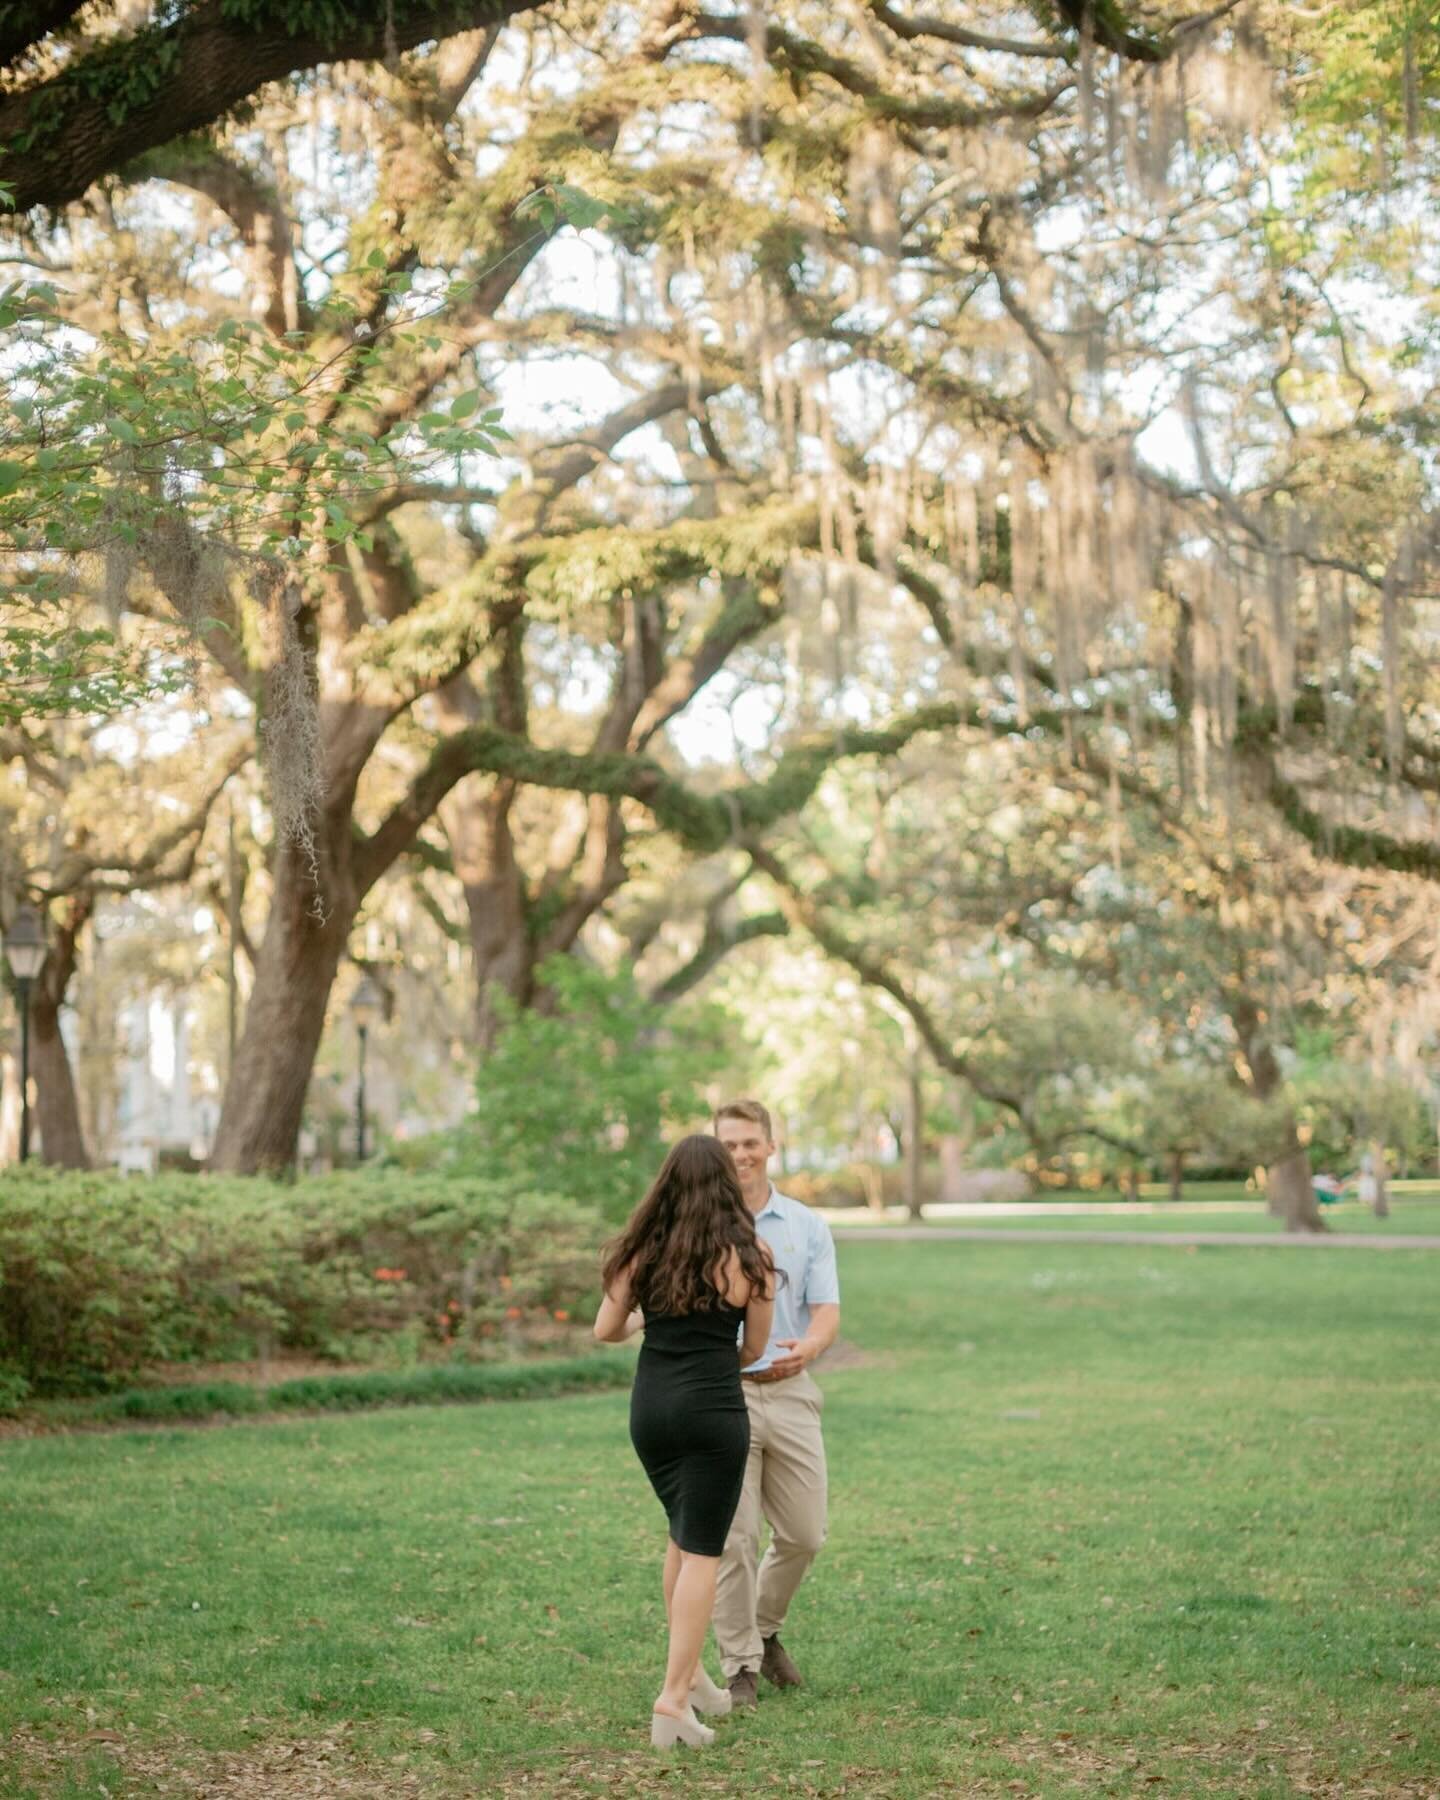 Minutes after his proposal, Bennett &amp; Maddi celebrated by strolling through the park before they headed off to dinner. She said she knew he was about to propose when she noticed him shaking. He said he had a speech planned before he dropped to on